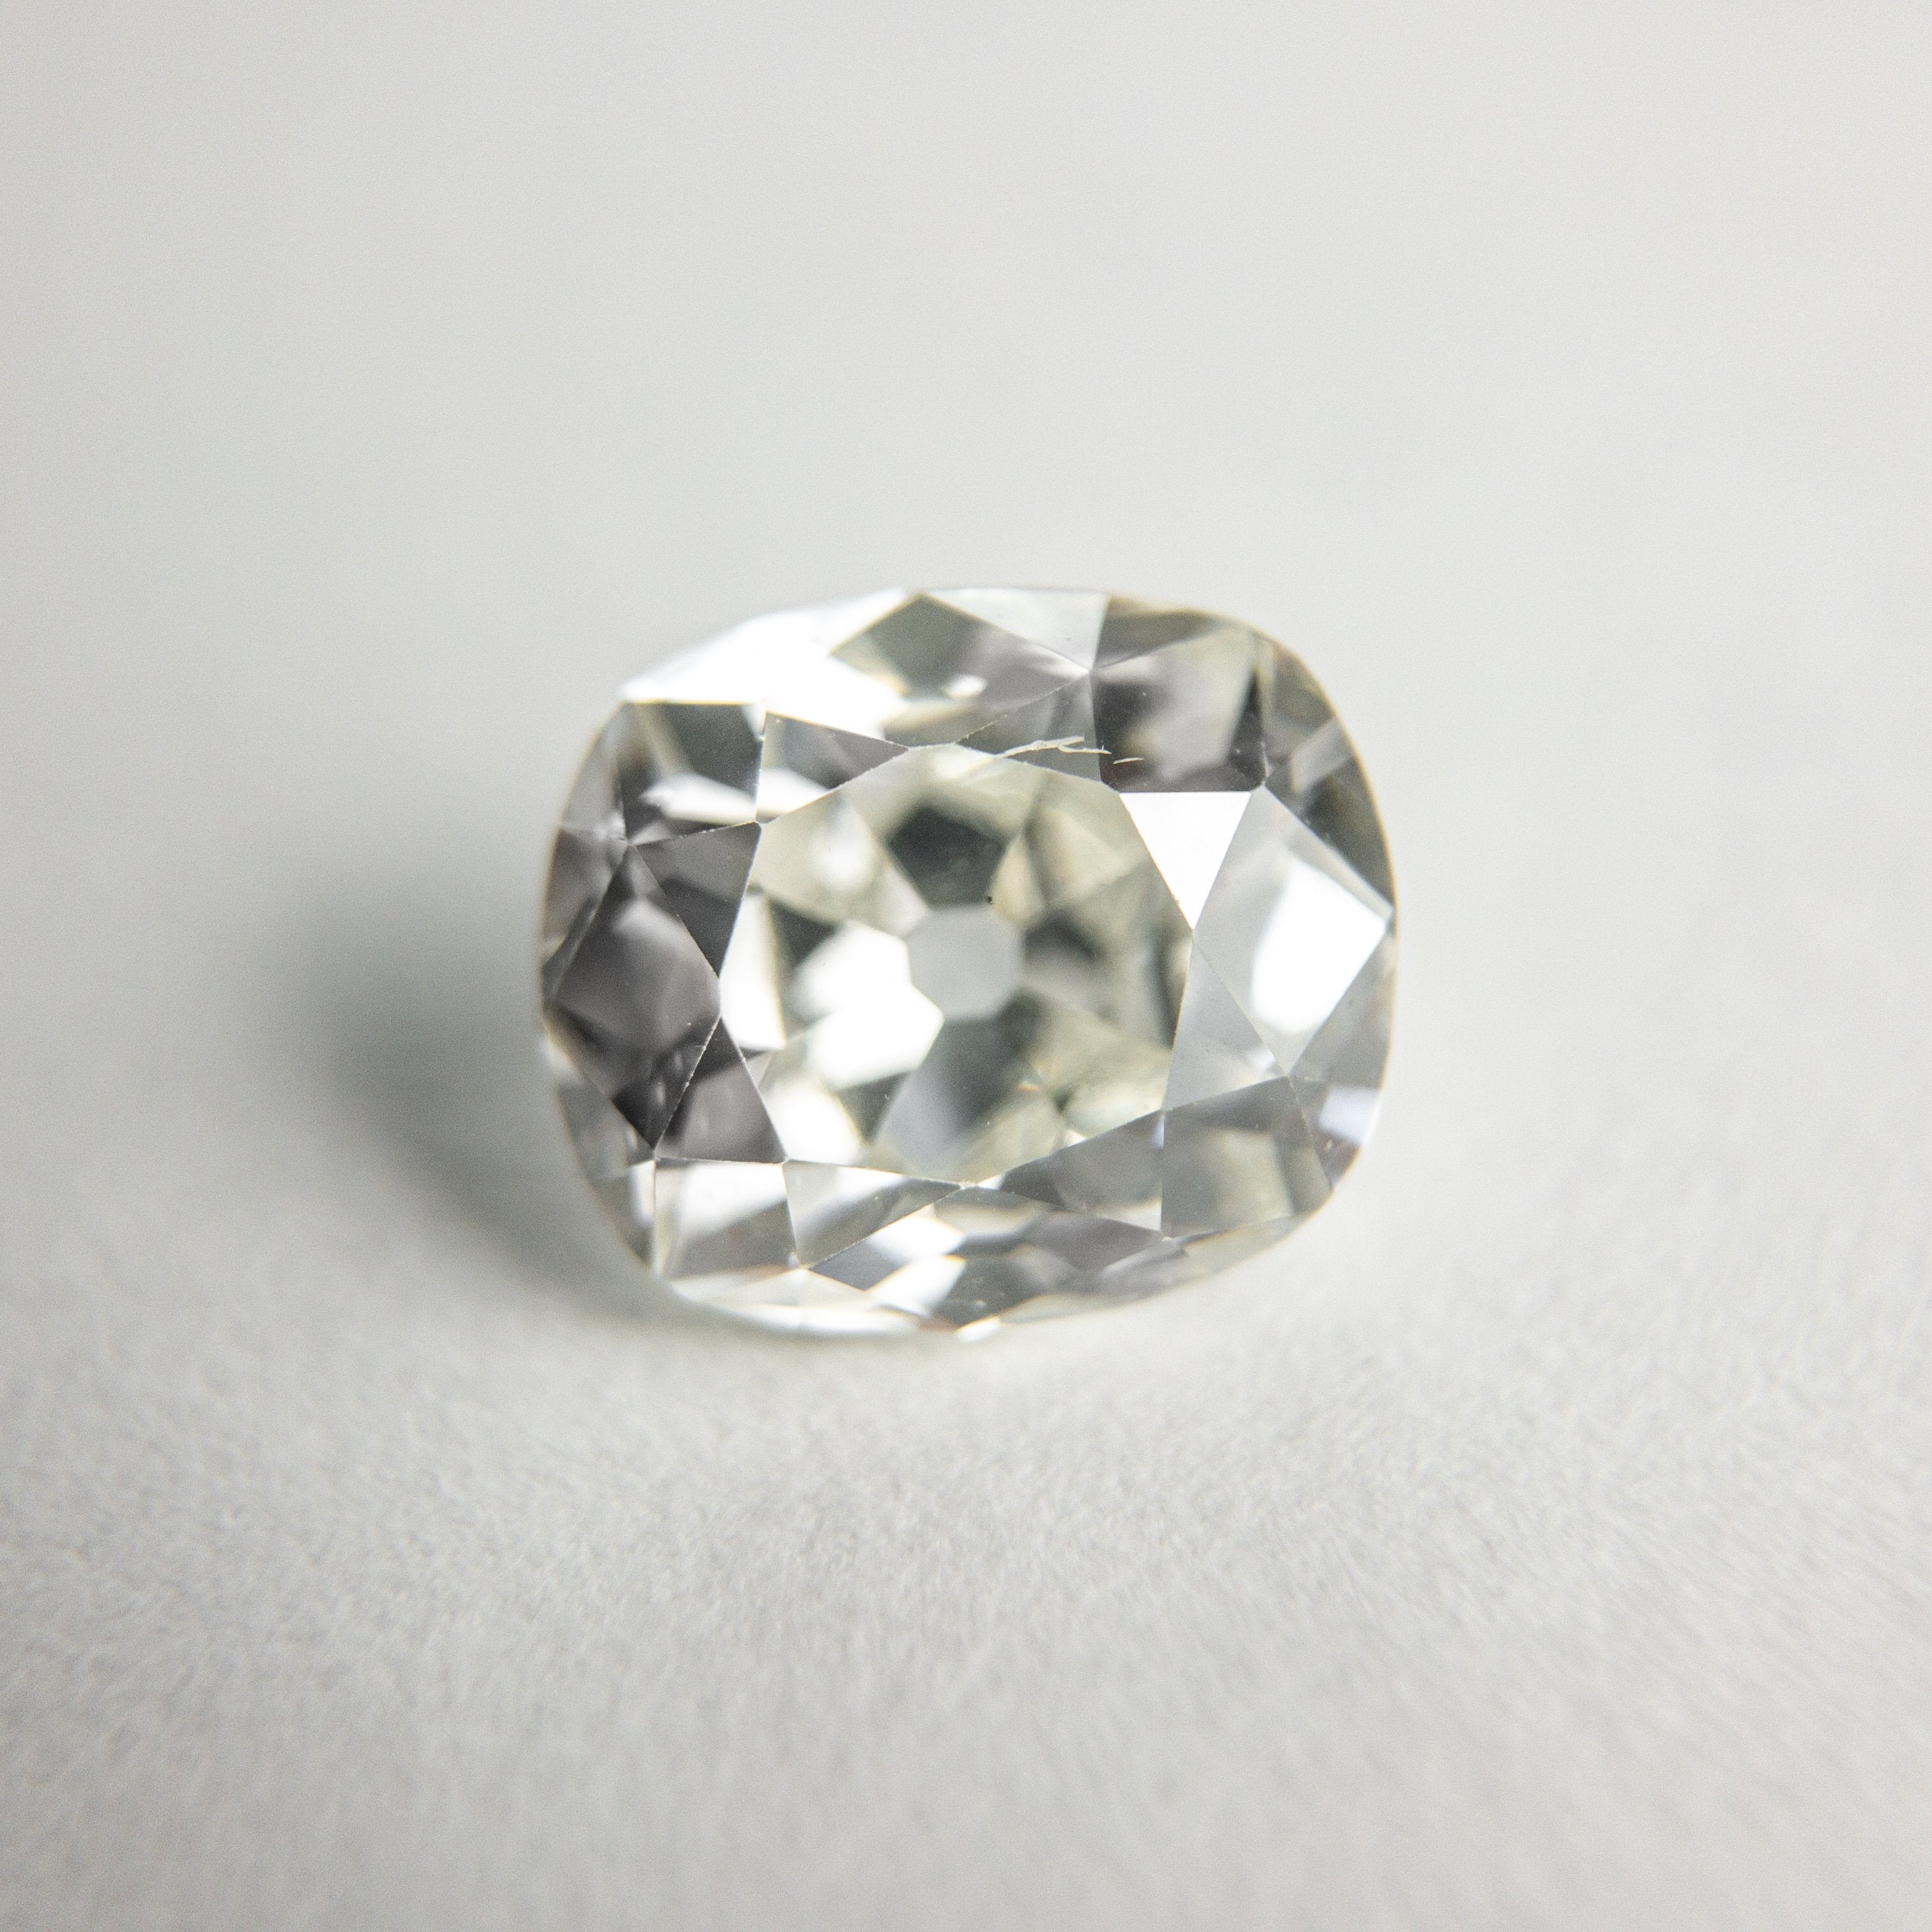 1.42ct 7.25x6.30x3.94mm SI1 J Antique Old Mine Cut 18210-01 HOLD D1314 10/21/20